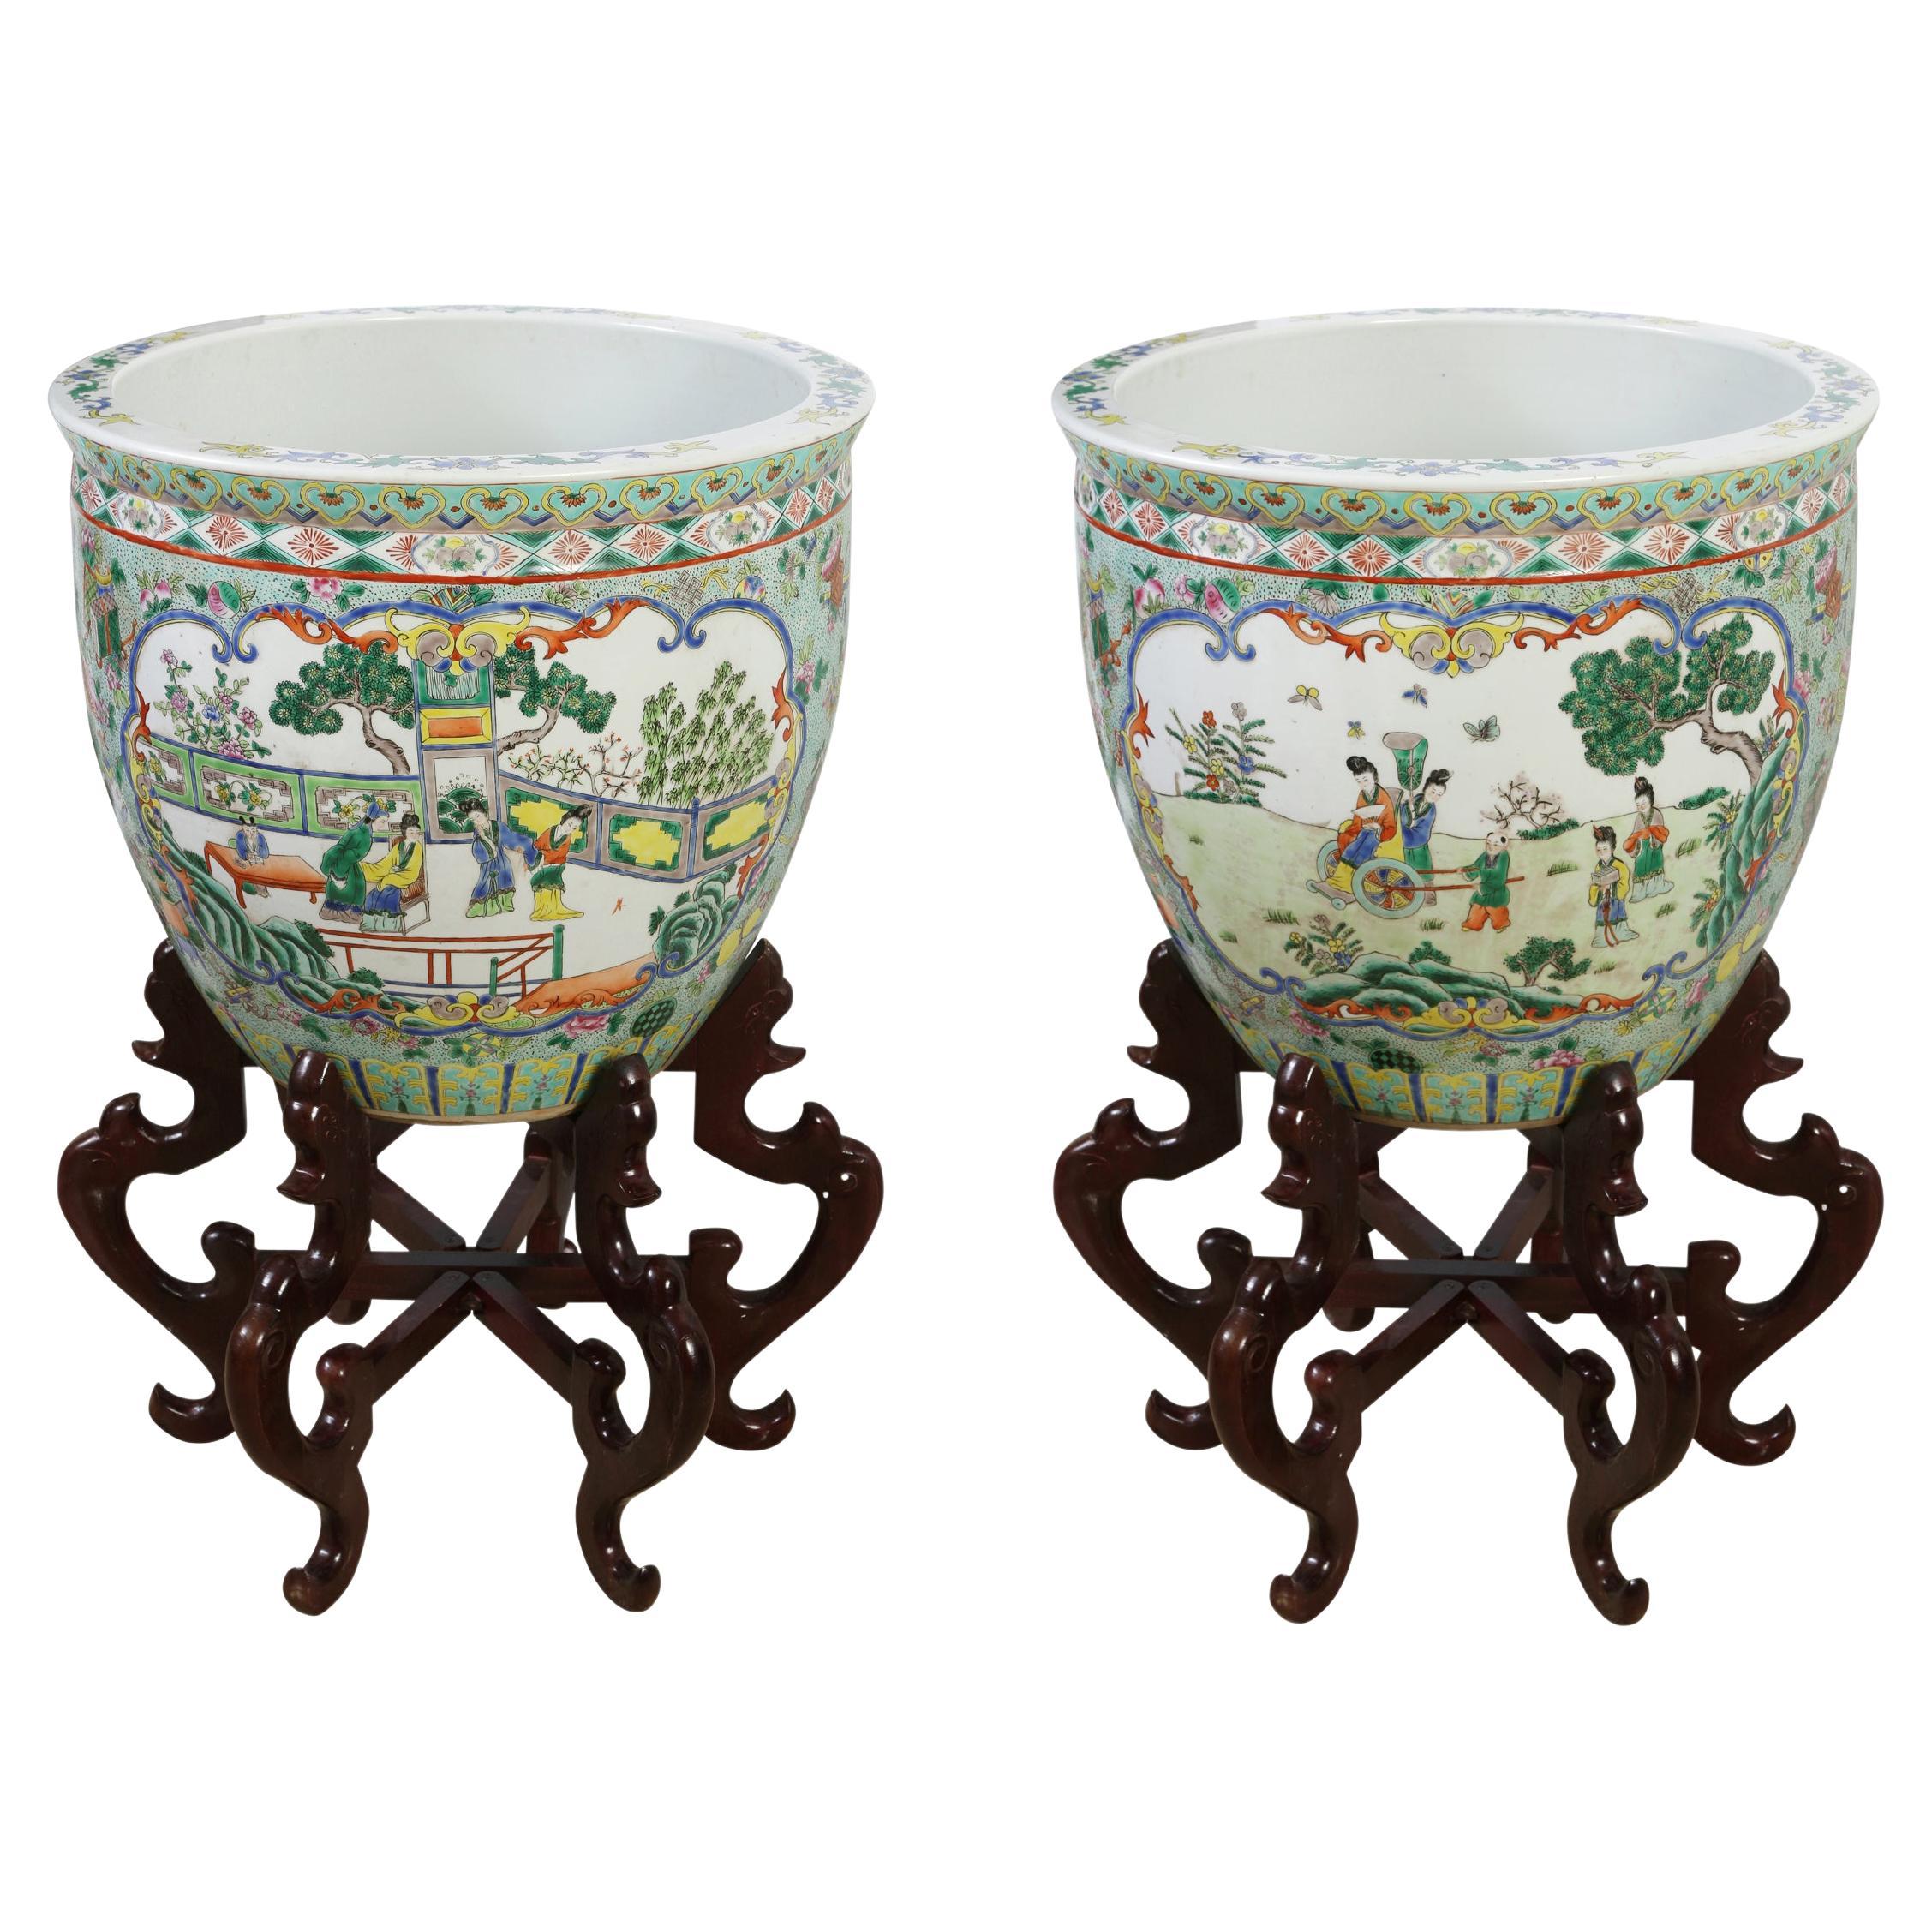 Pair Oversize Chinoiserie Porcelain Planters on Hexagonal Wood Stand